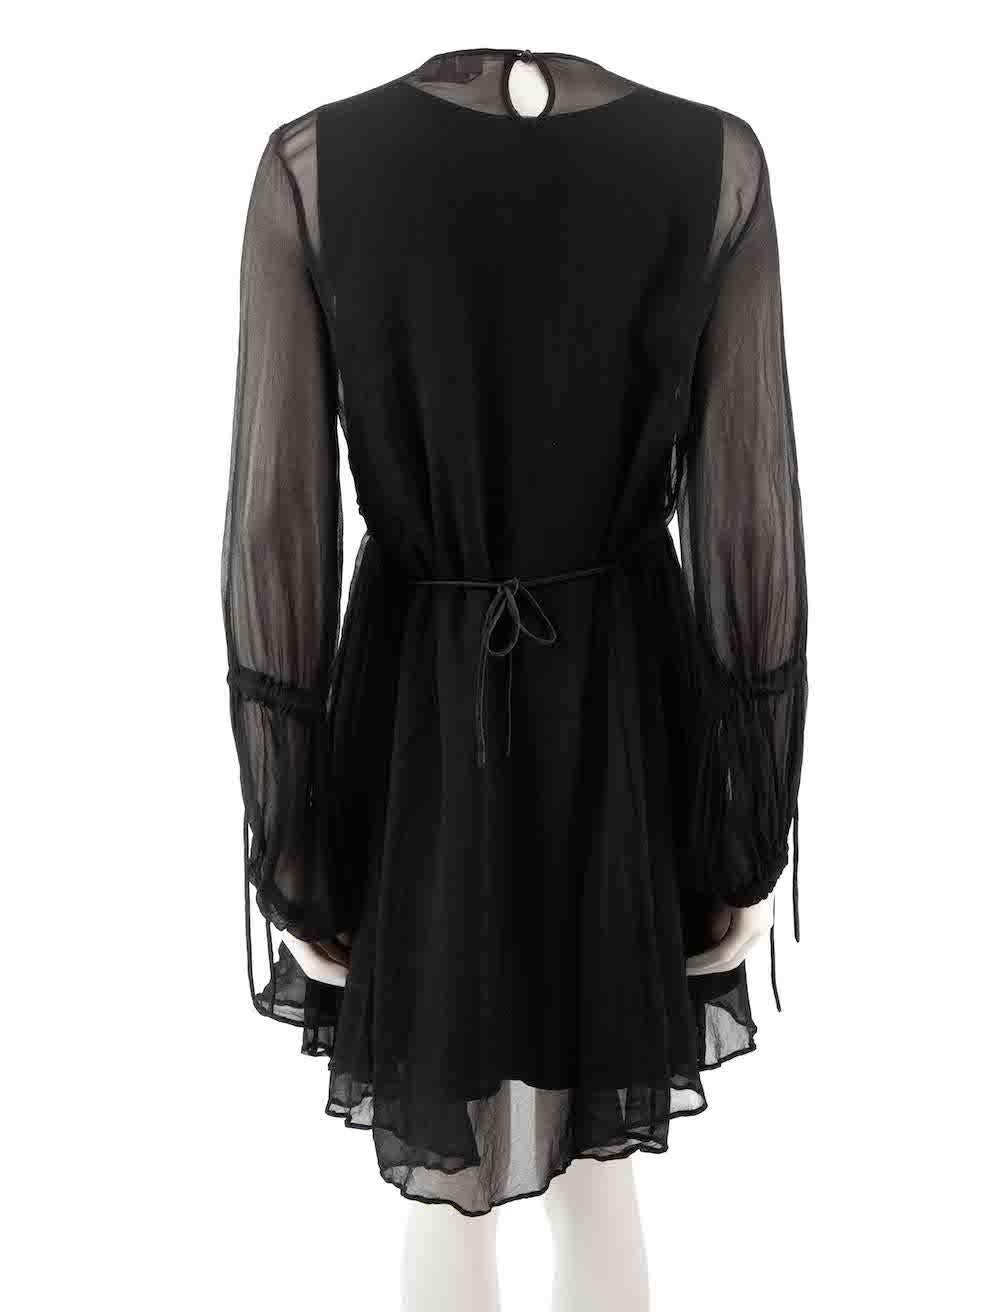 Sportmax Black Sheer Layered Long Sleeve Dress Size M In Good Condition For Sale In London, GB